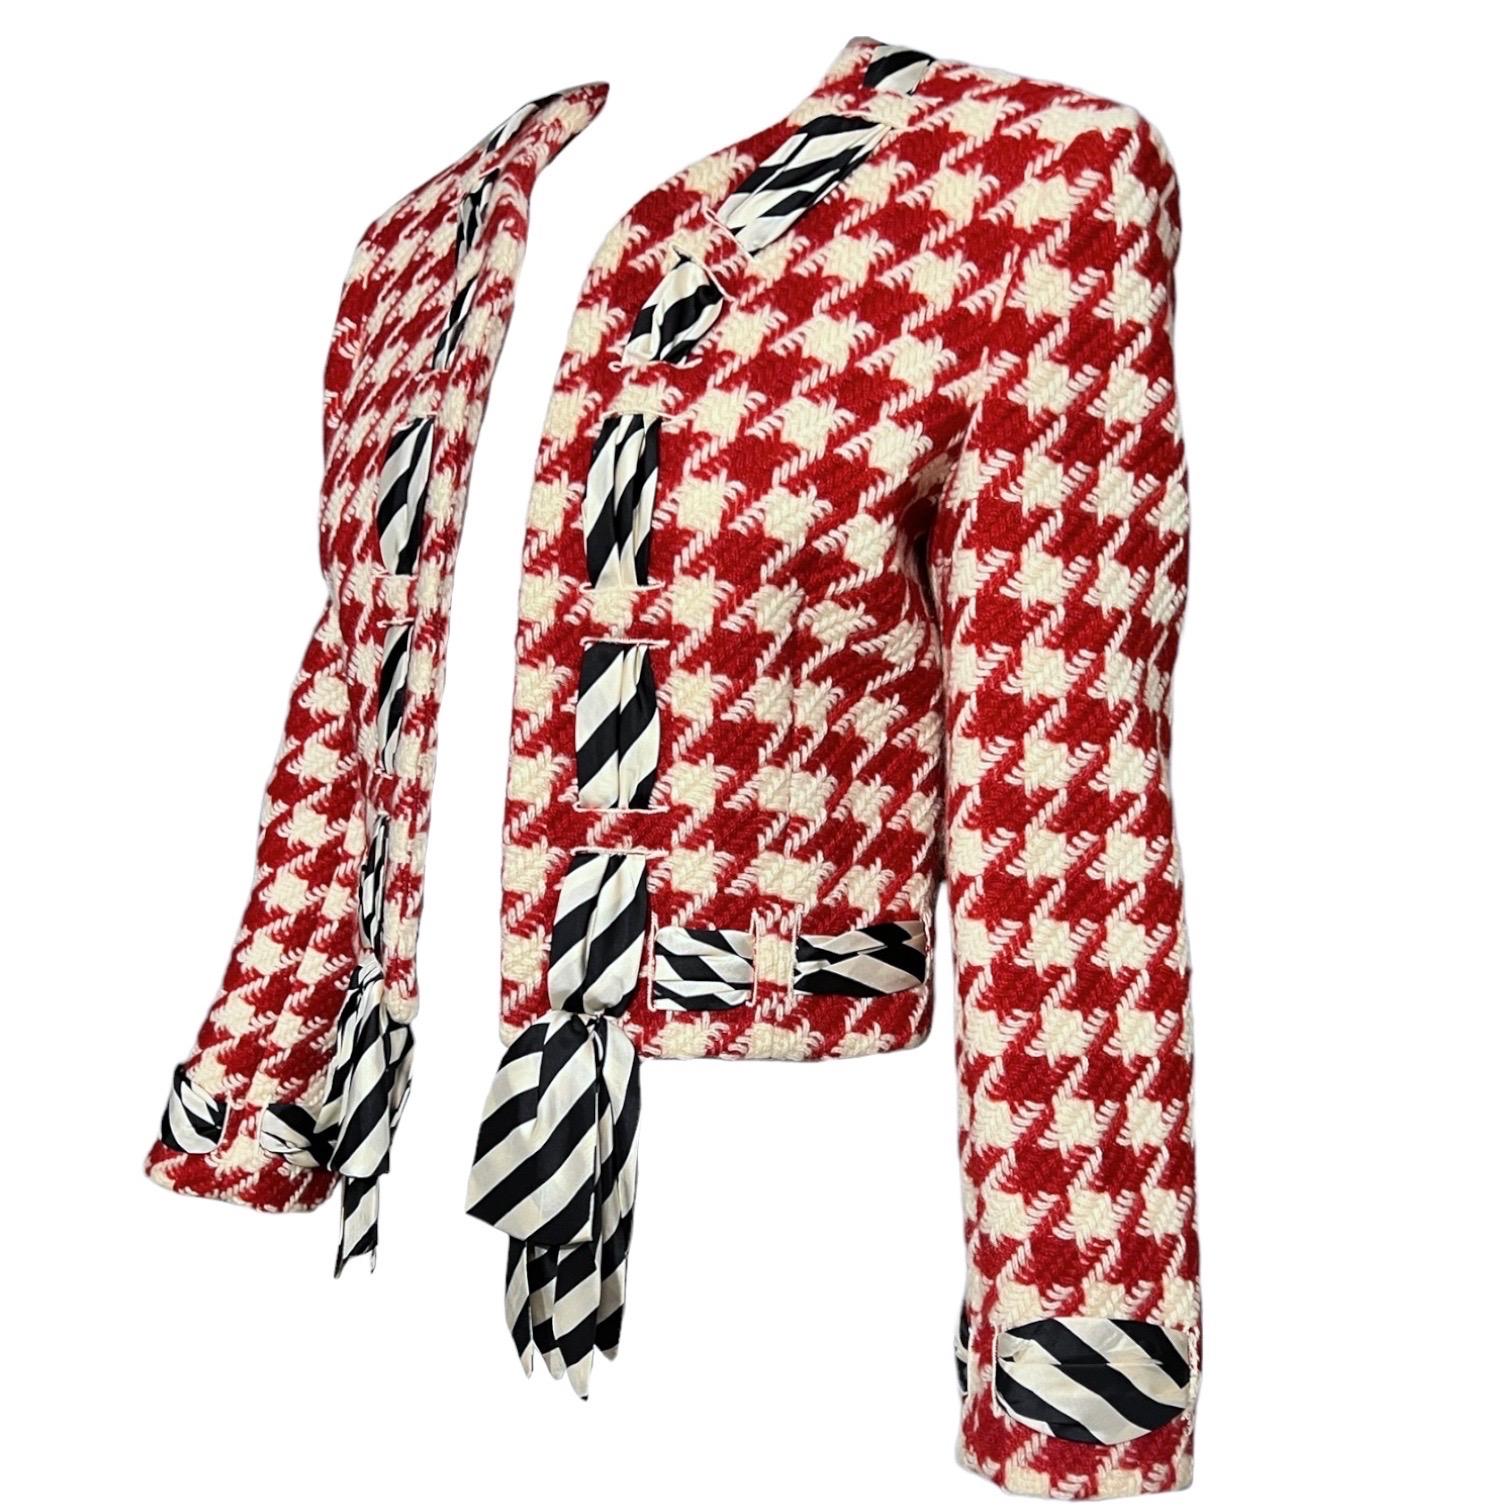 Beige Moschino Cheap and Chic Vintage Houndstooth Jacket as seen on Princess Diana